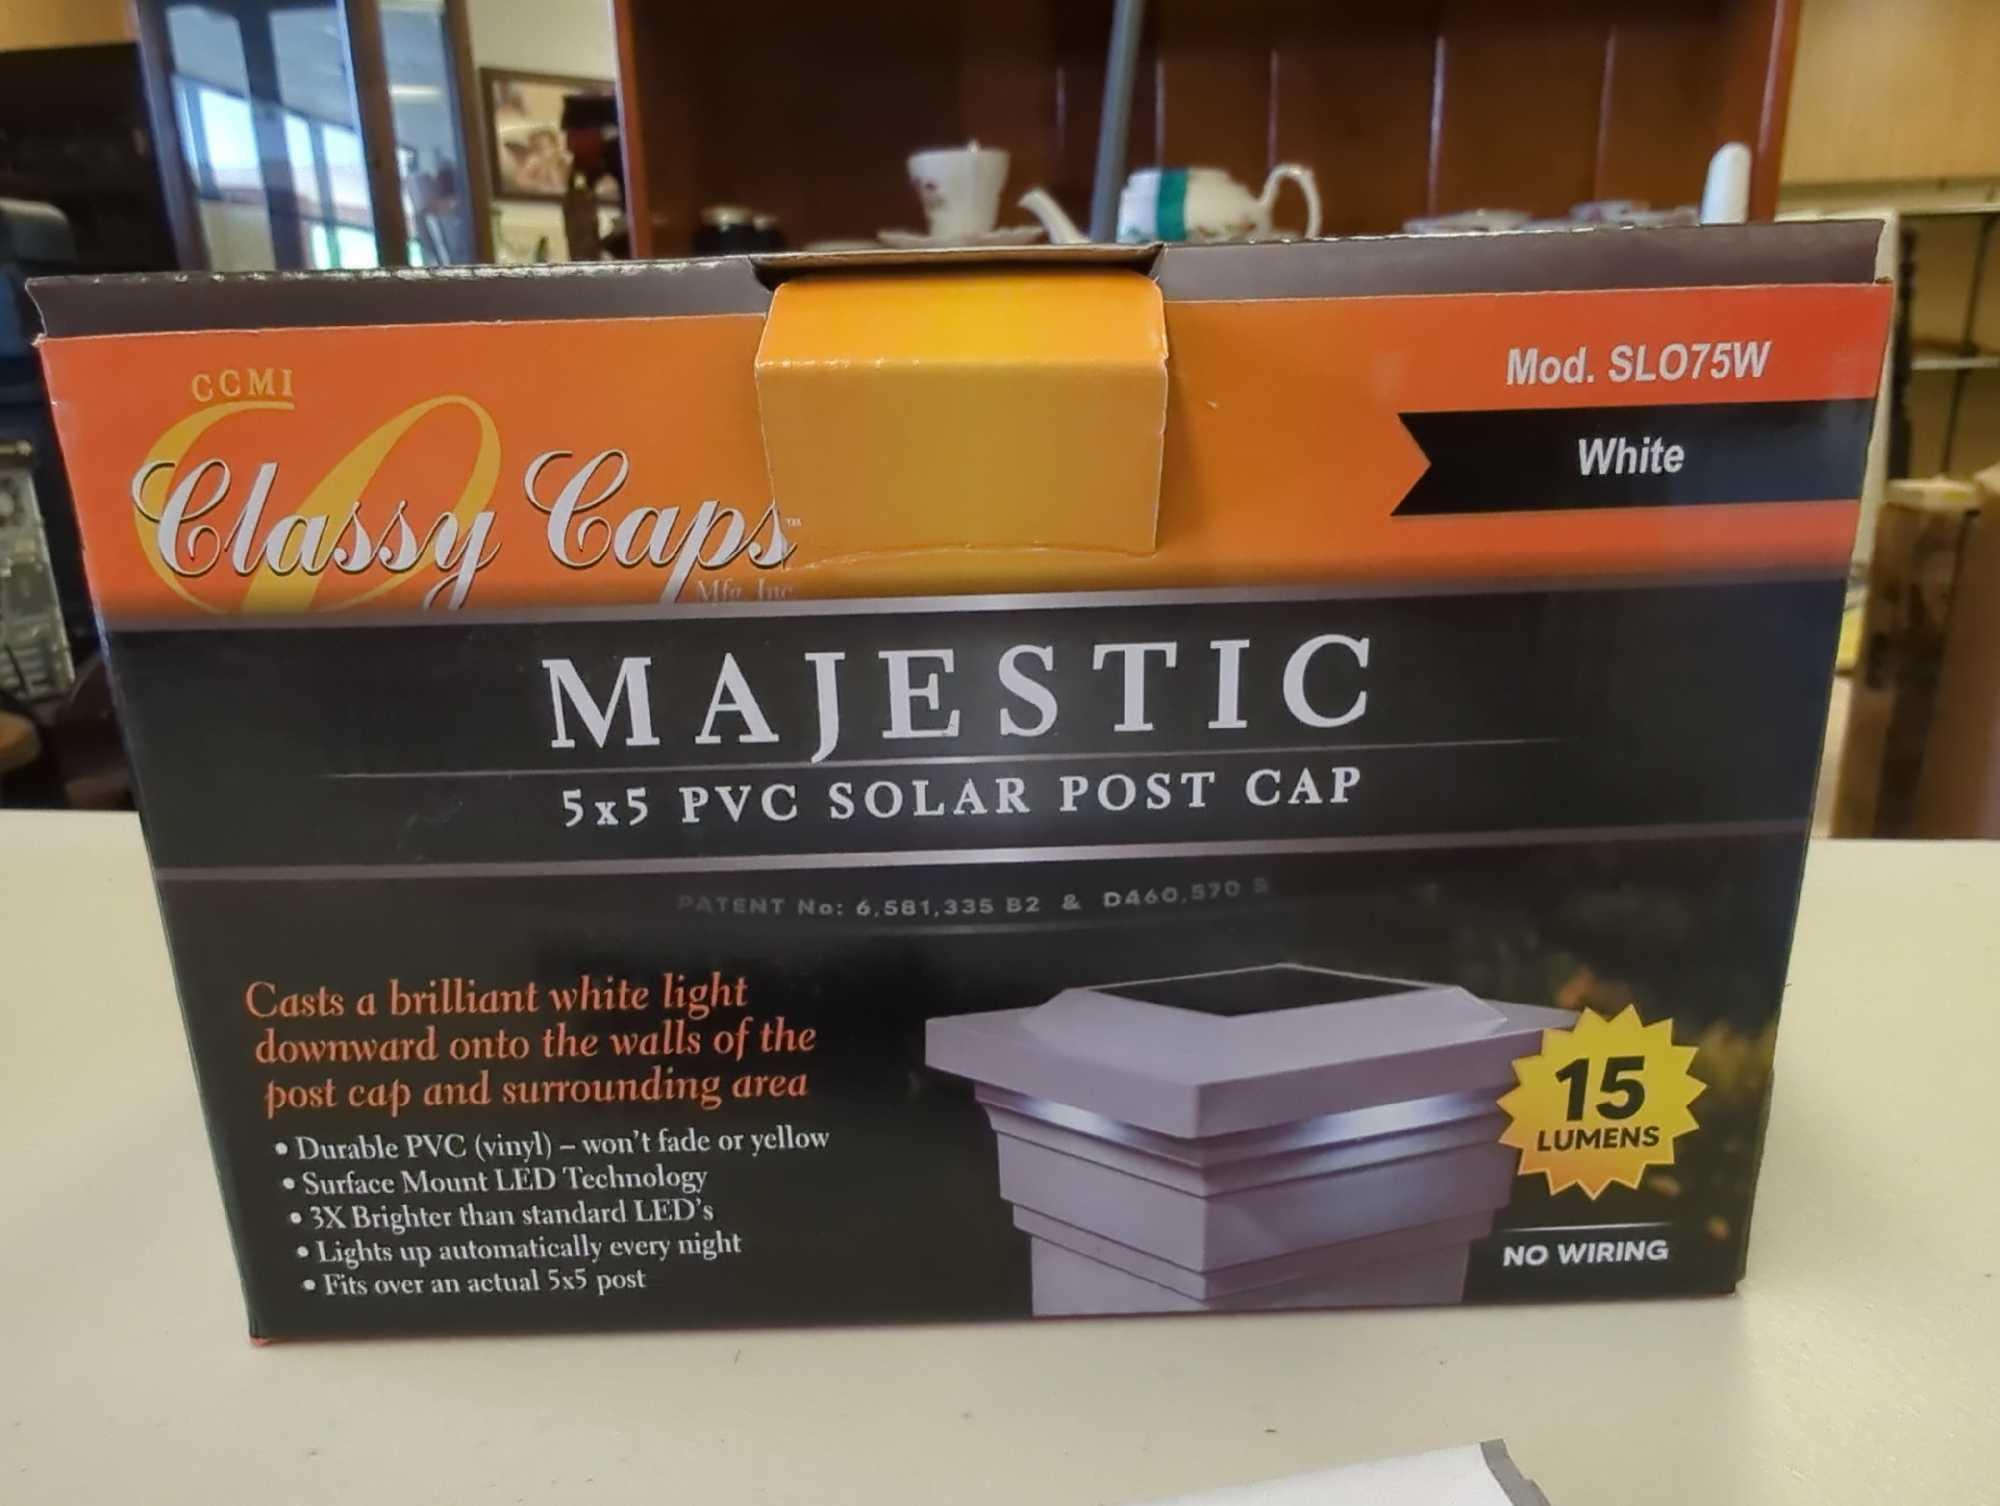 CLASSY CAPS Majestic 5 in. x 5 in. Outdoor White Vinyl LED Solar Post Cap. Comes as is shown in